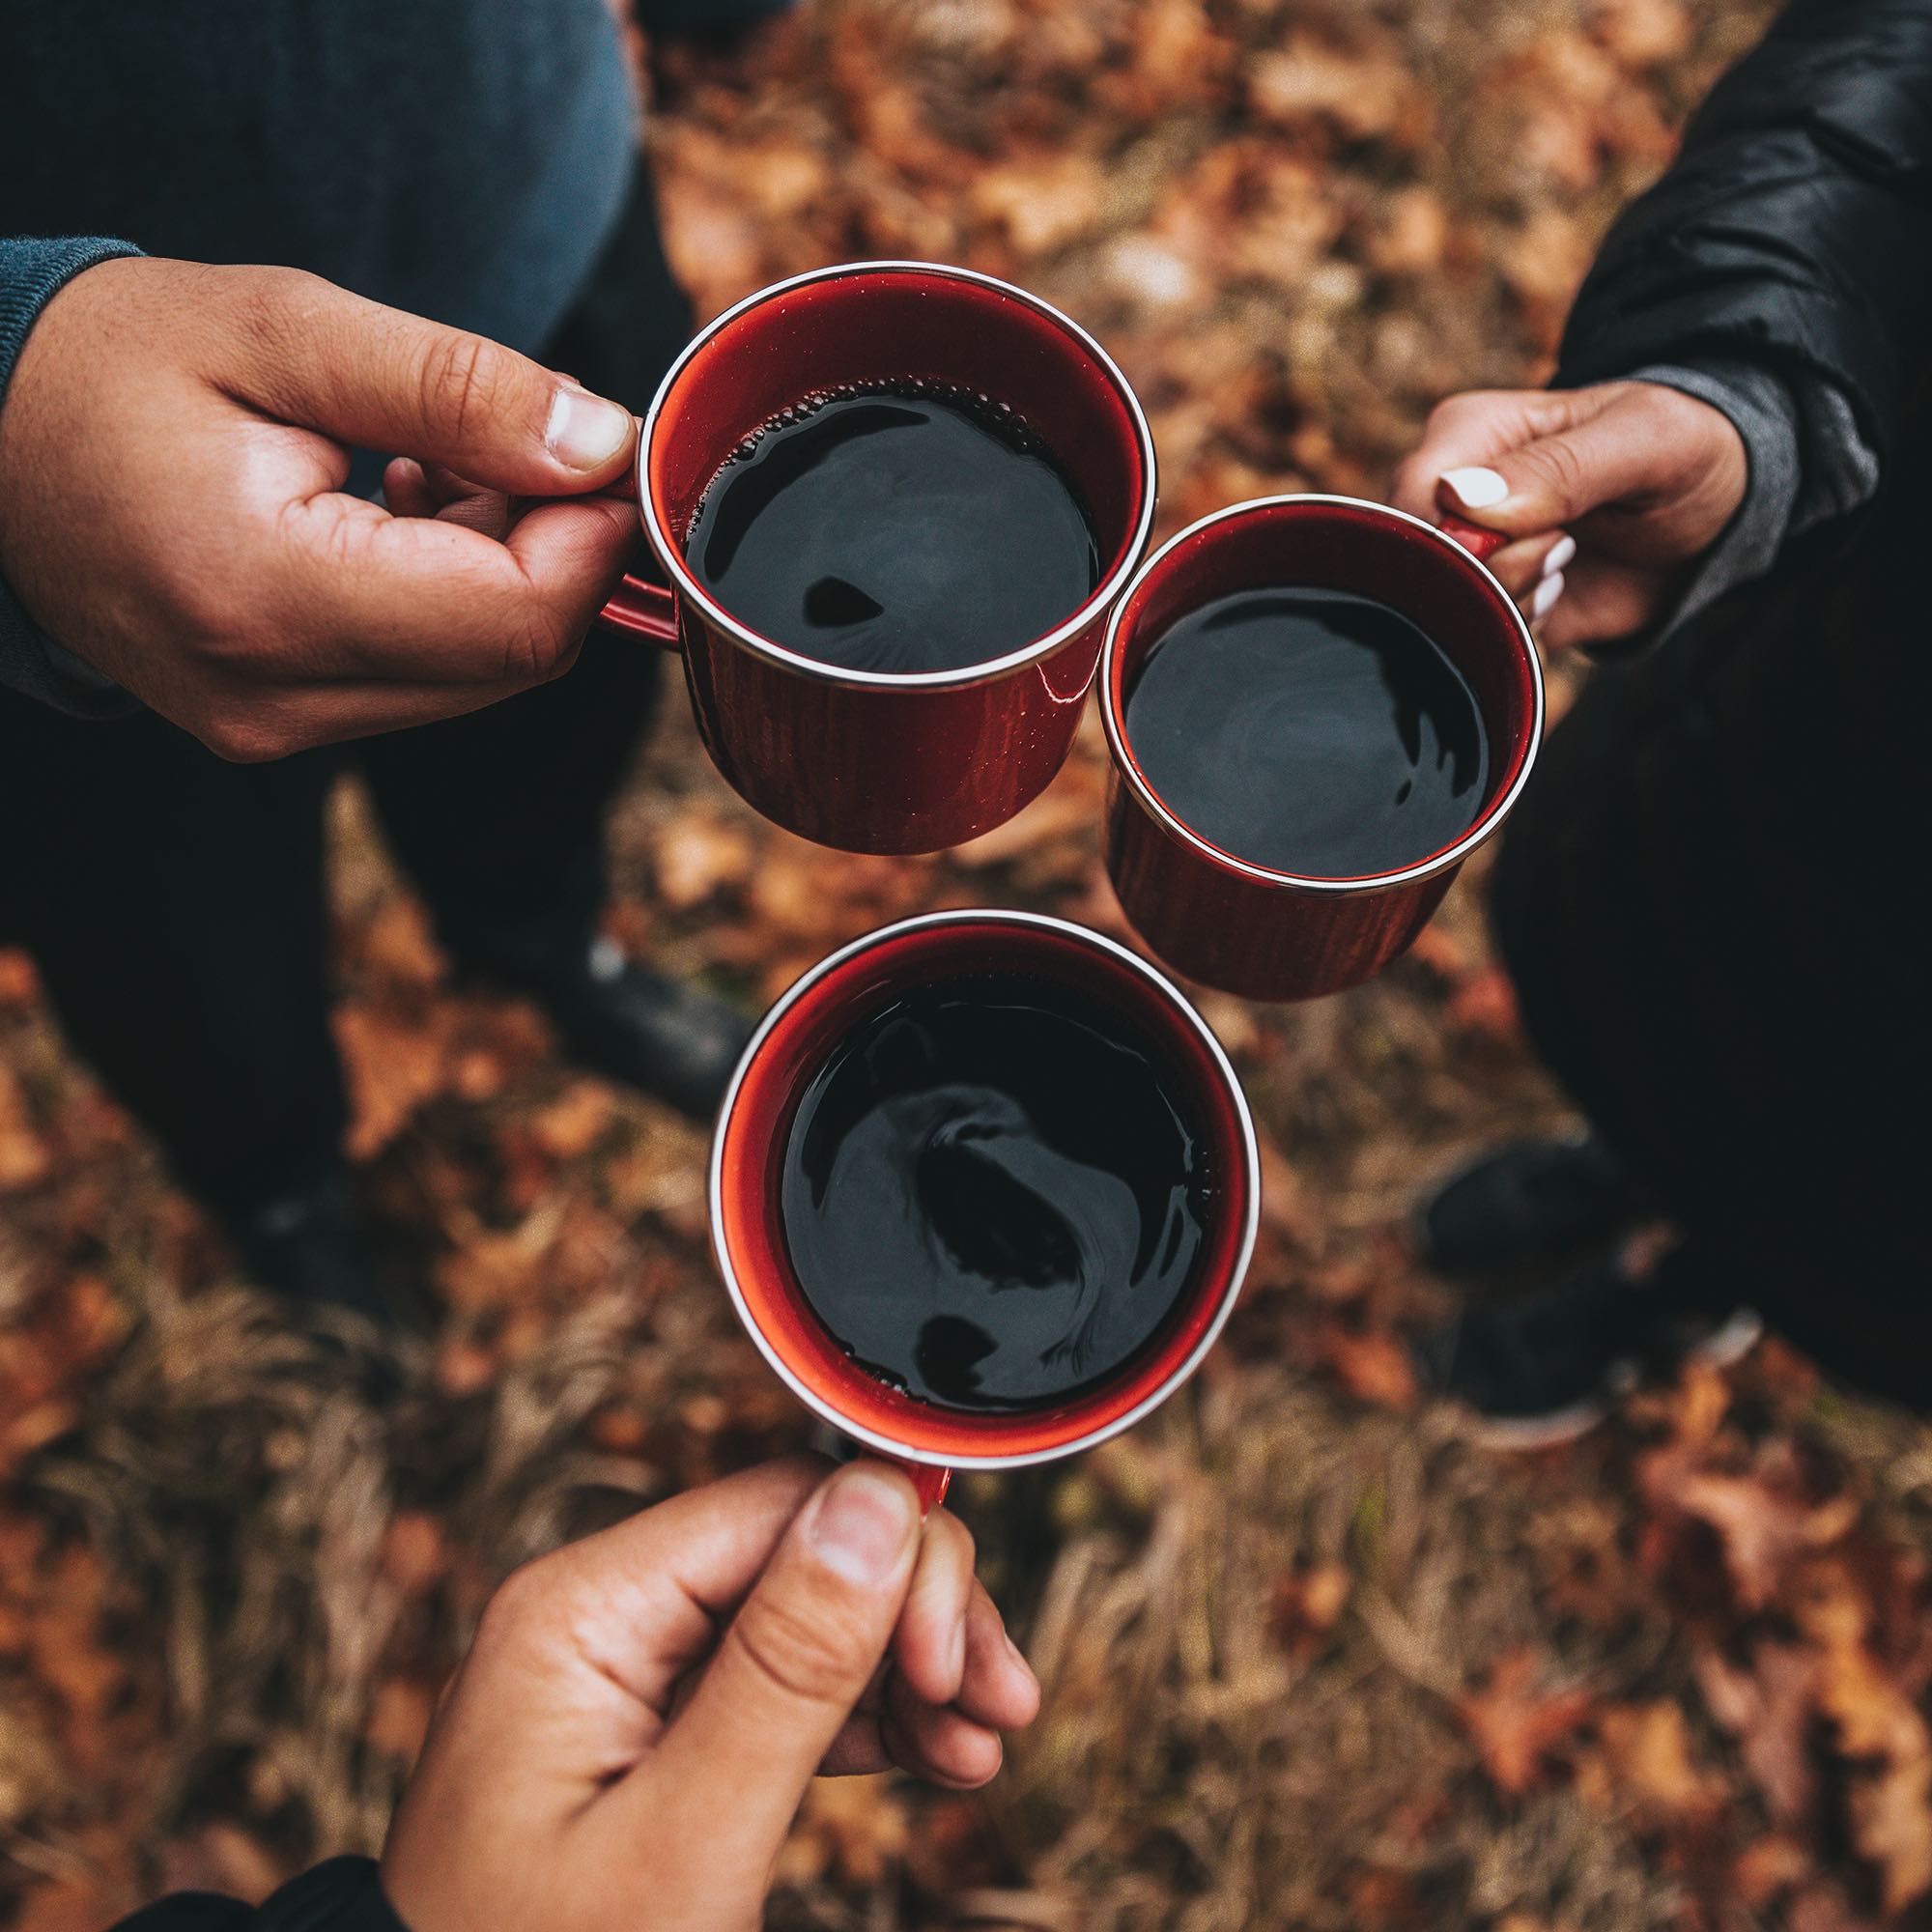 Three hands holding red coffee mugs outdoors.